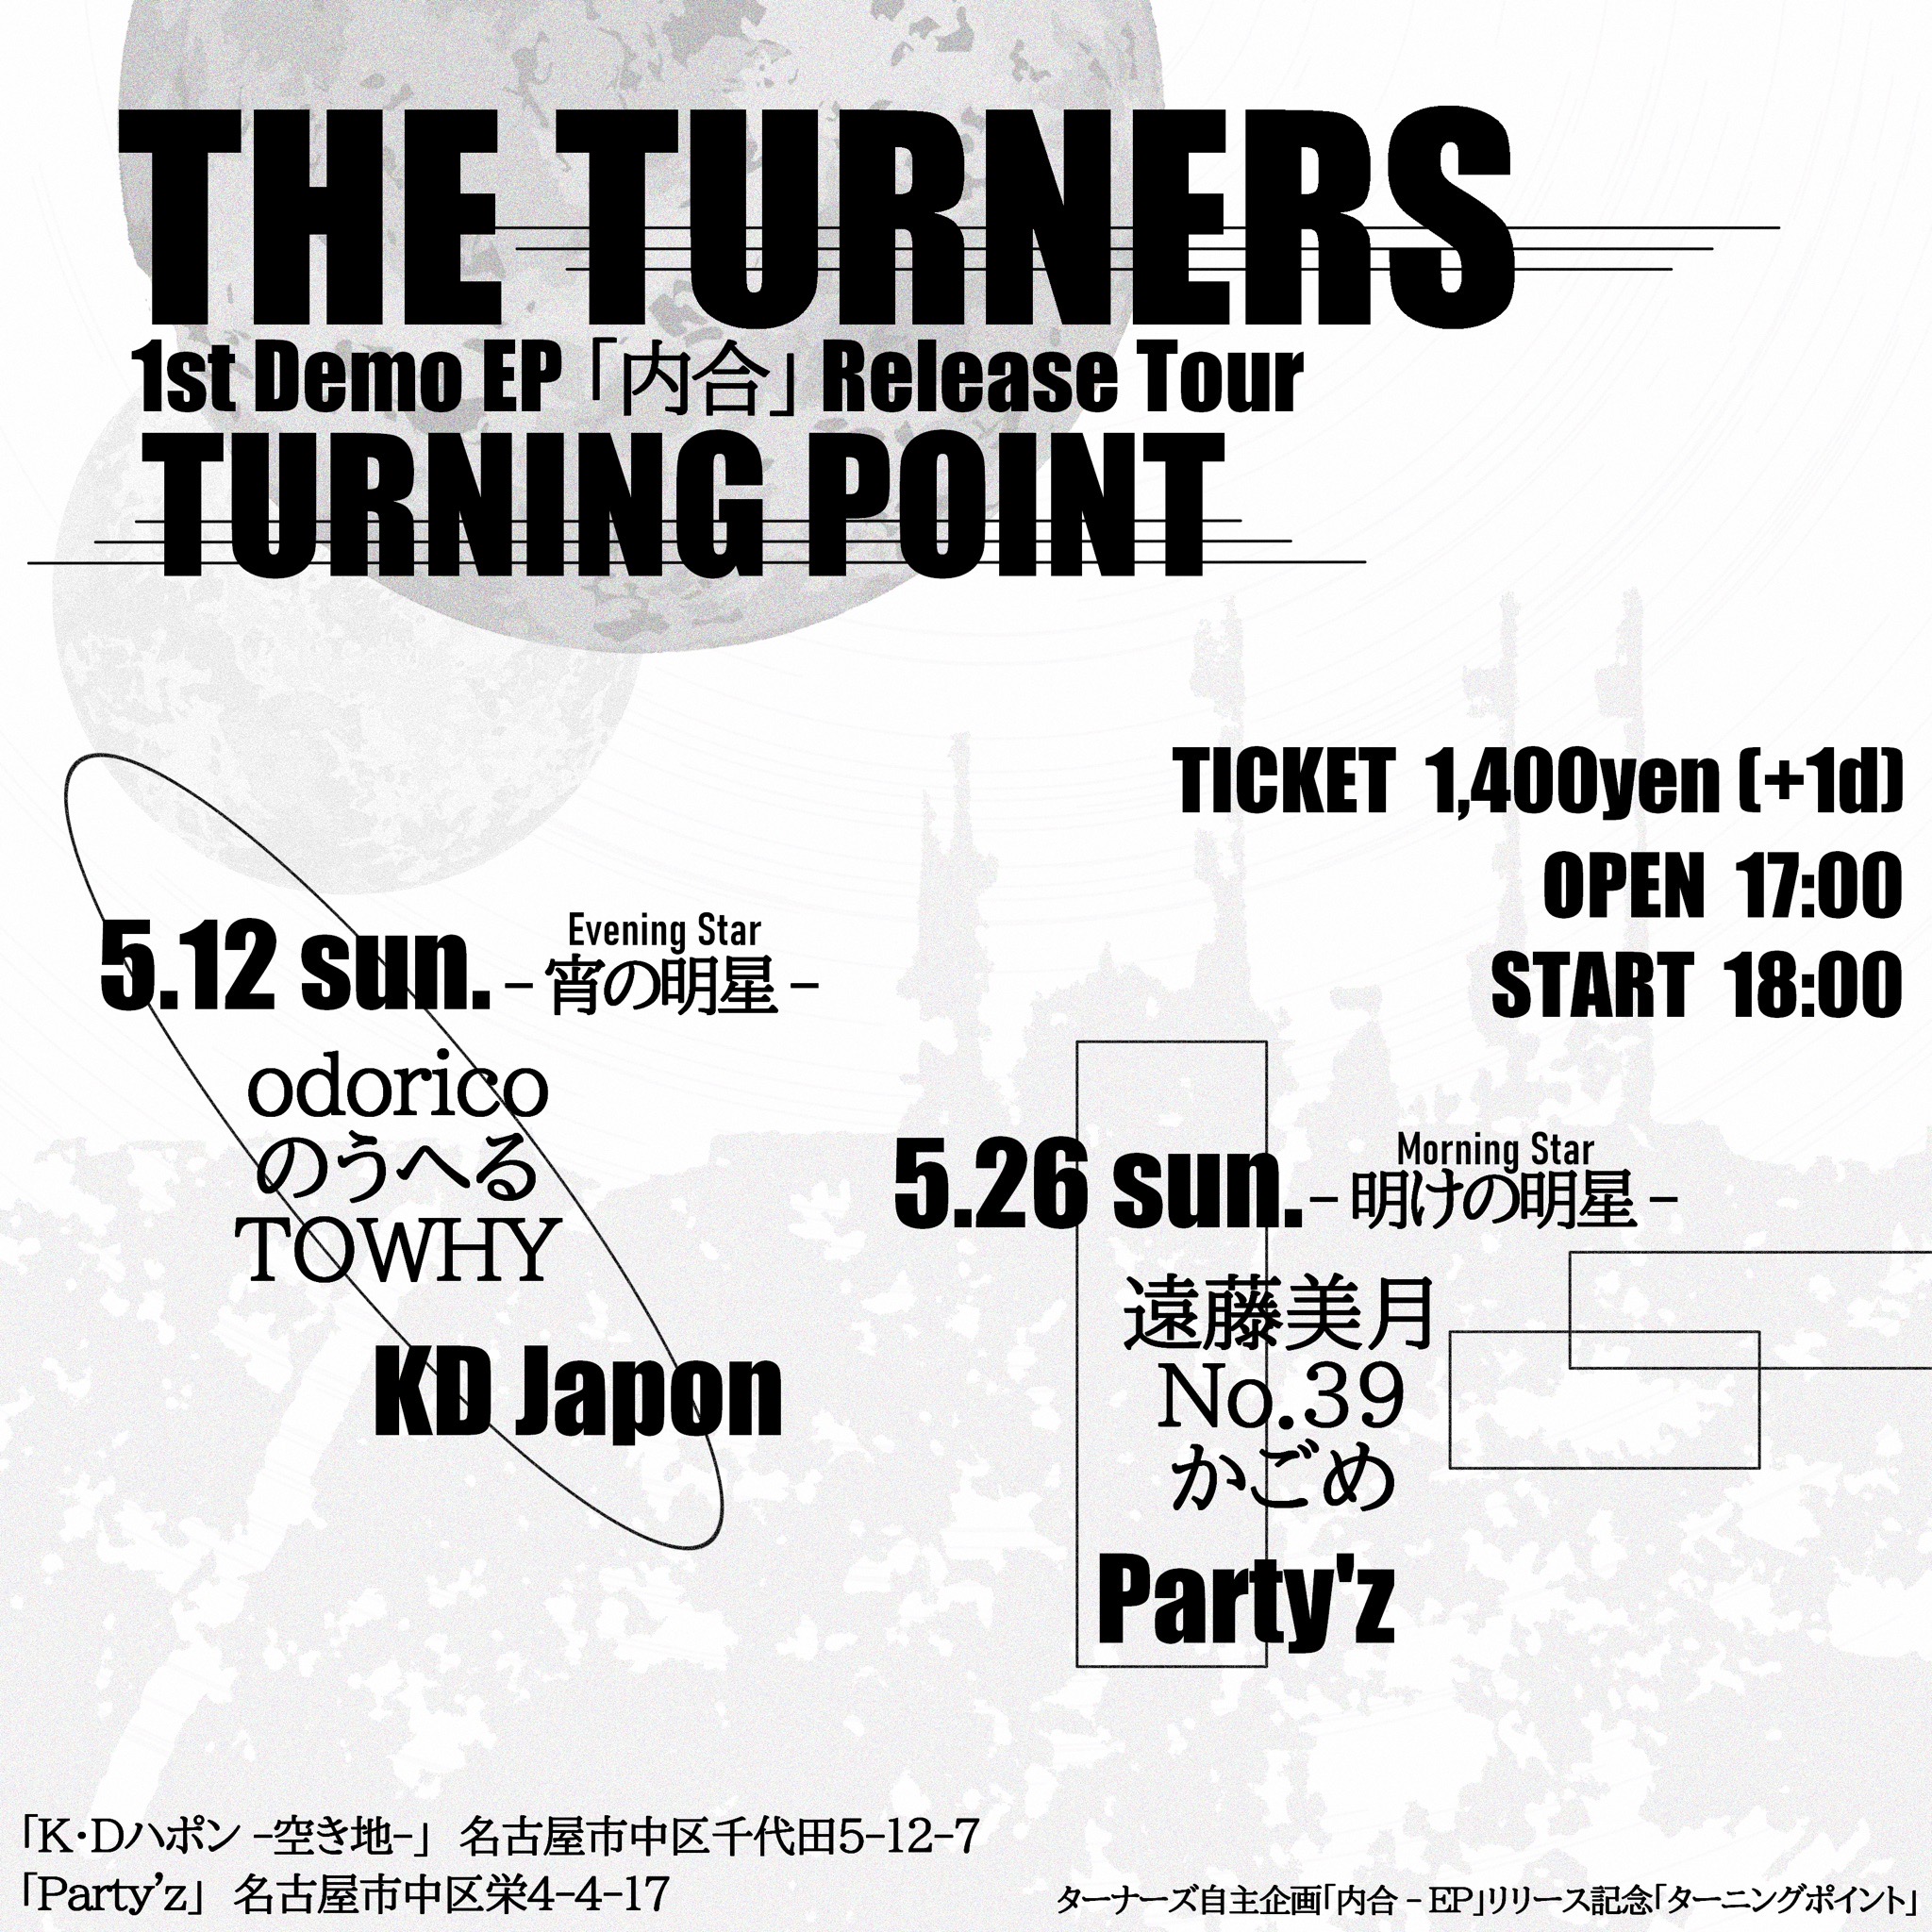 THE TURNERS 1st demo EP 「内合」 Release Tour TURNING POINT